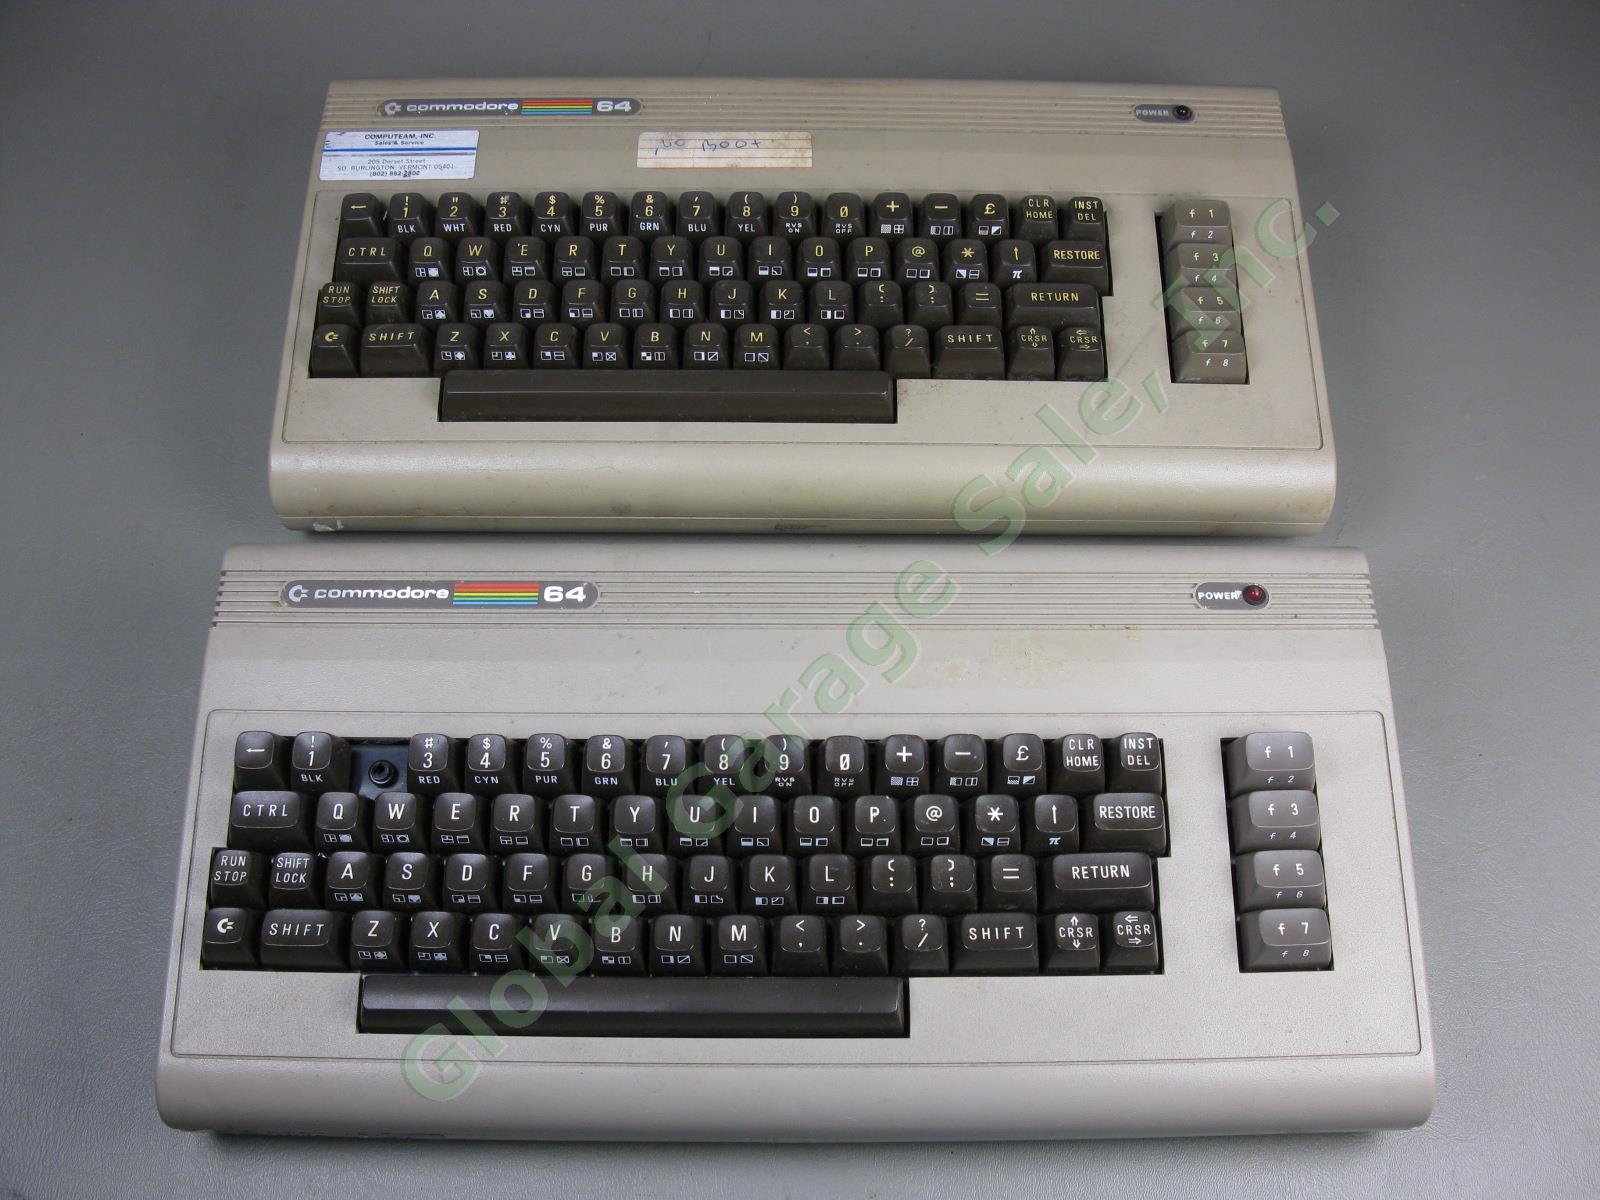 2 Vtg Commodore 64 Personal Computers Lot Untested As-Is Parts/Repair No Power??